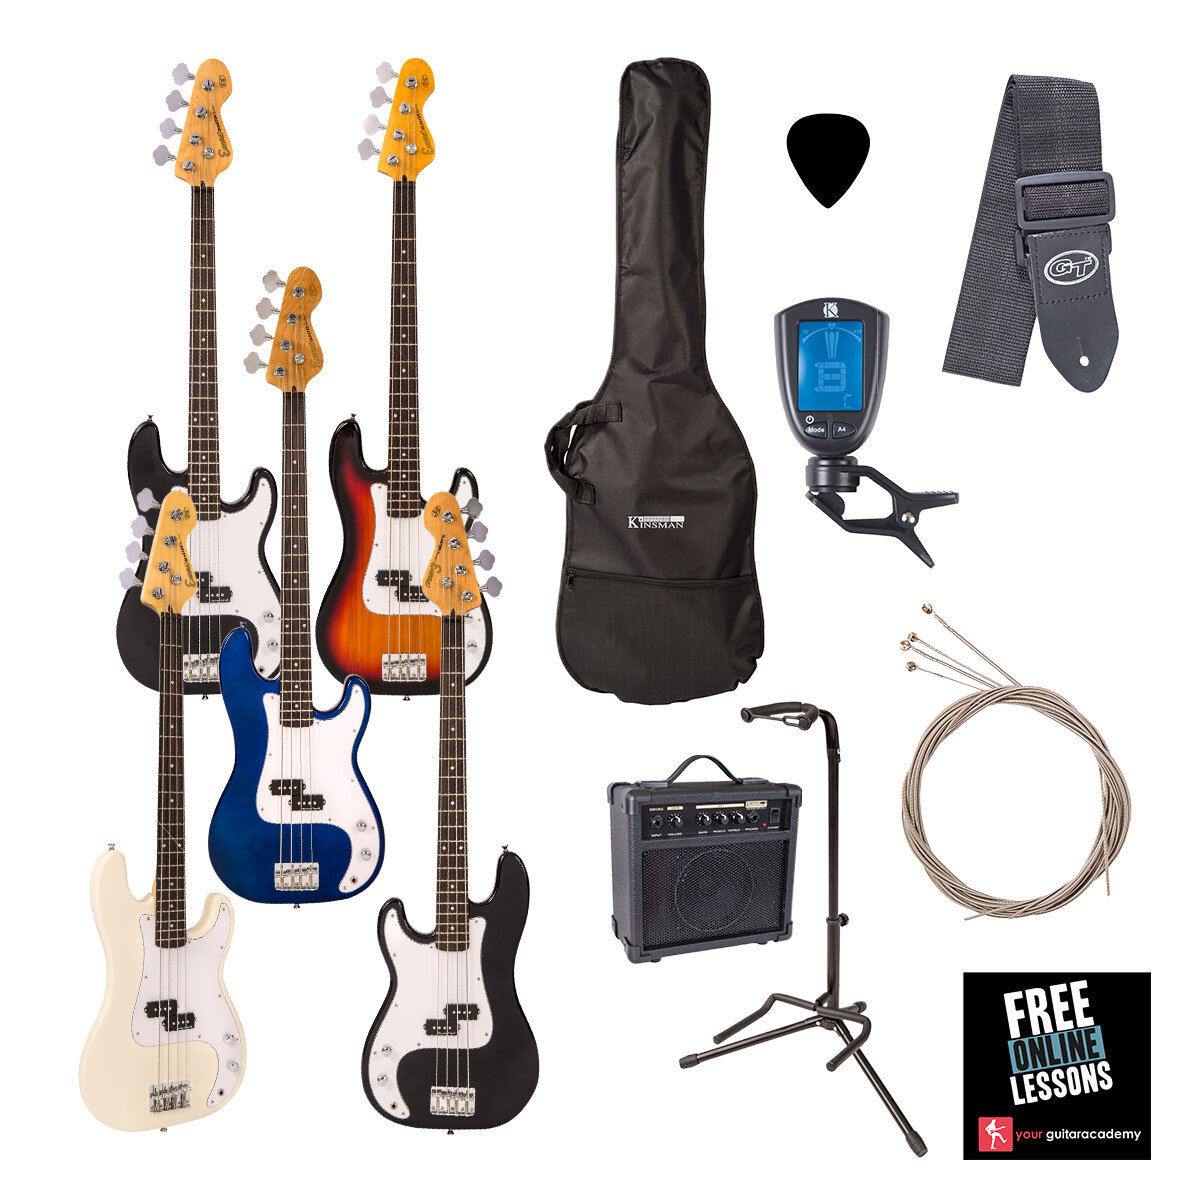 Encore Bass Guitar in 5 colours and components